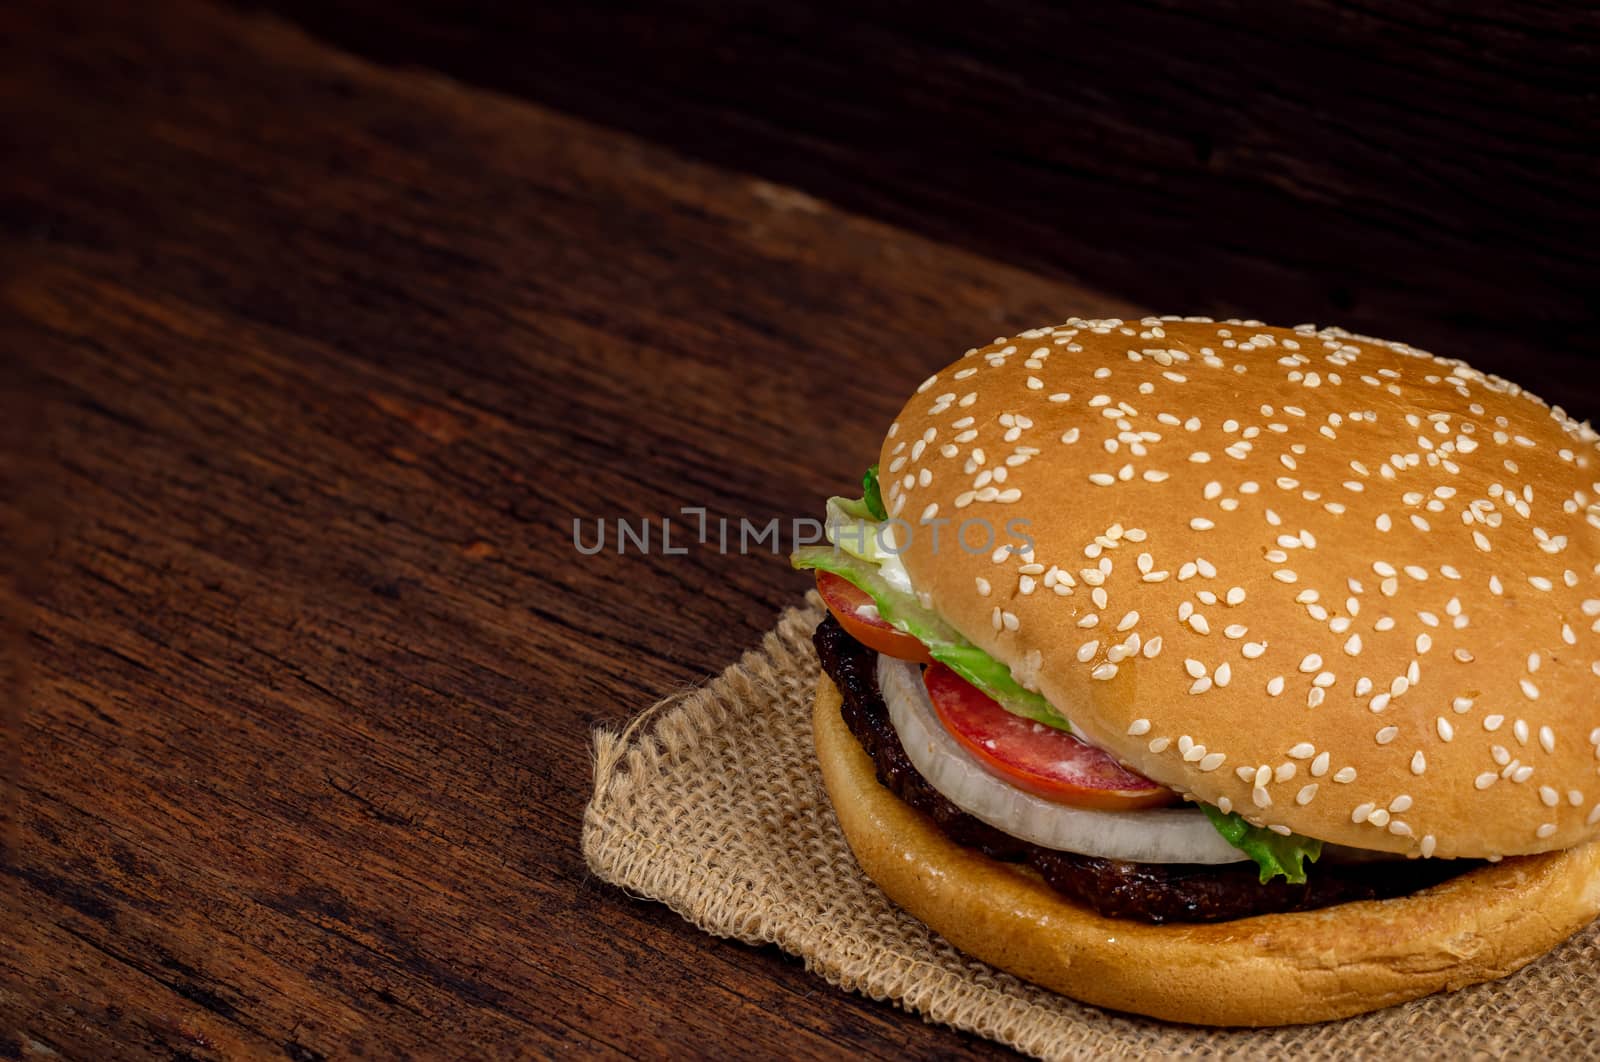 Hamburger meat and vegetables on wooden background by sompongtom